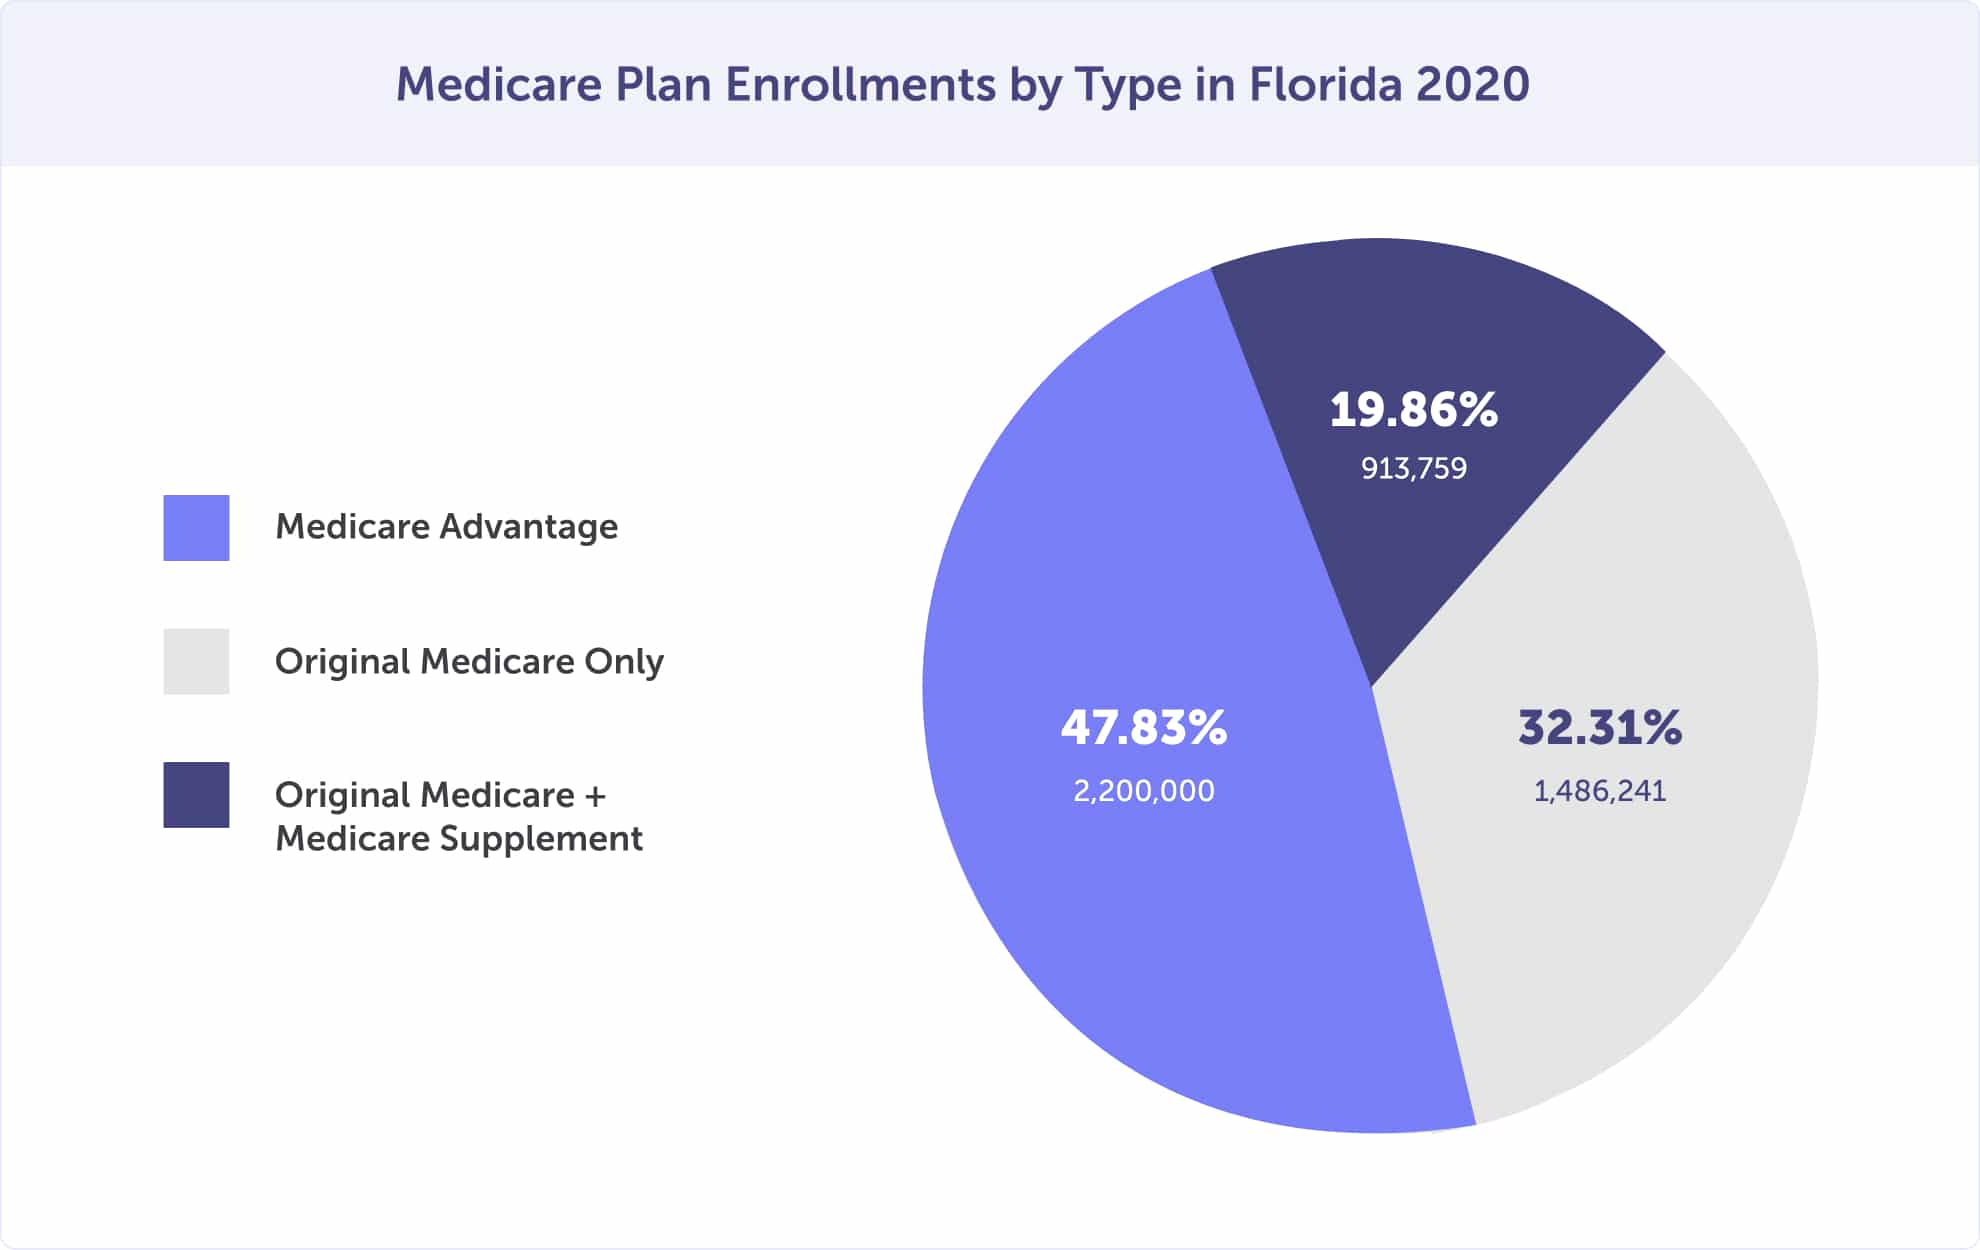 Medicare plan enrollments by type in Florida